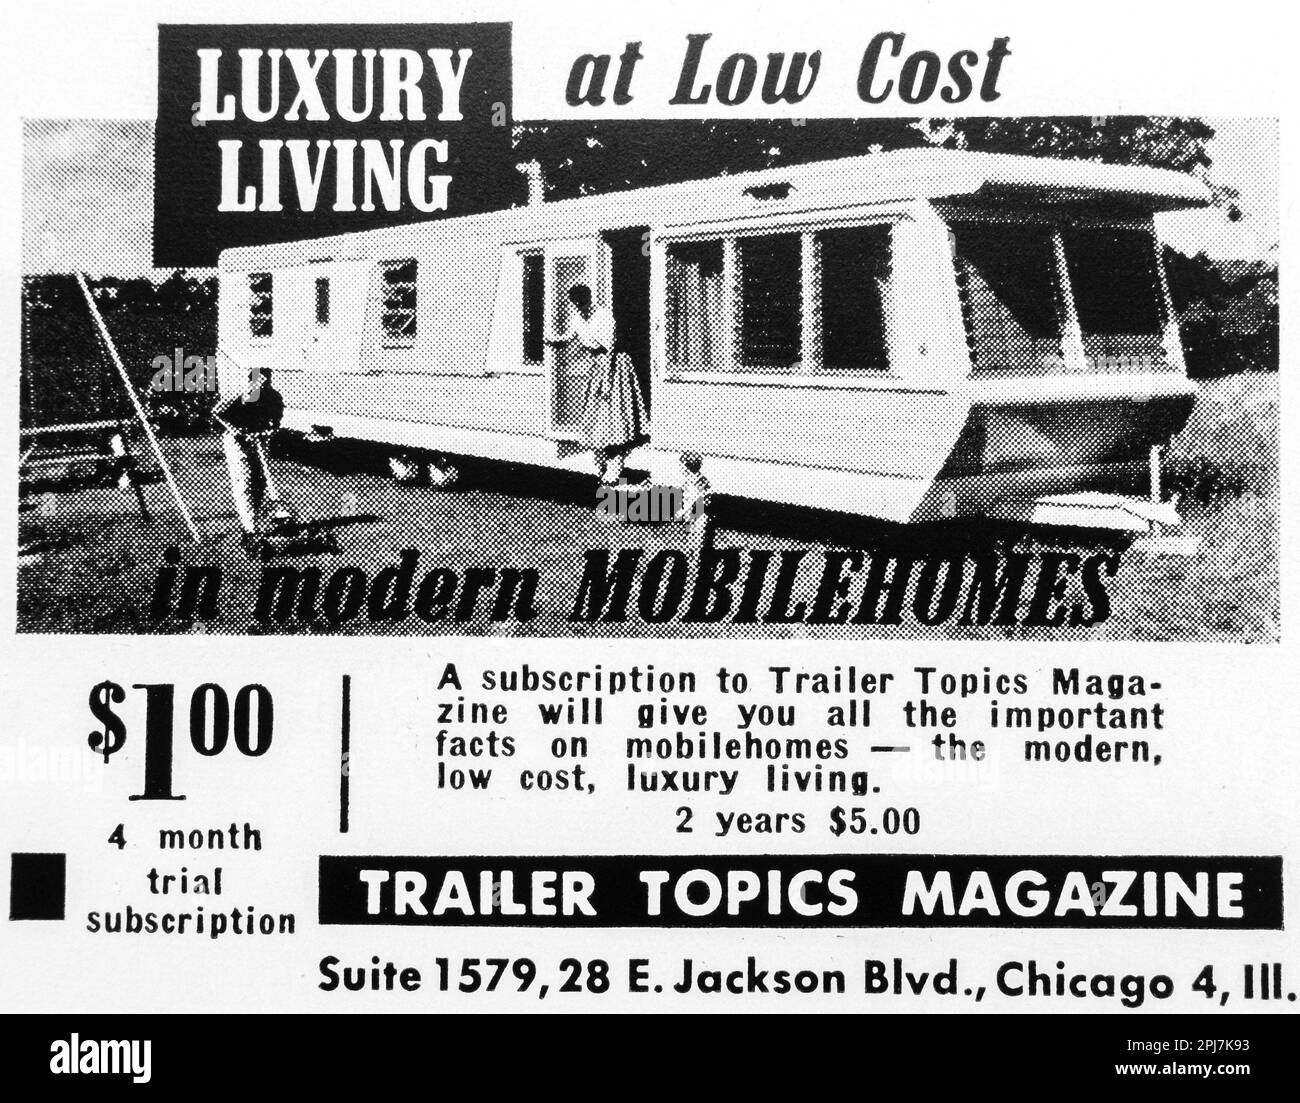 Trailer Topics Magazine subscription trial for $1 - luxury living in mobile homes  advert in a Natgeo magazine, November 1959 Stock Photo